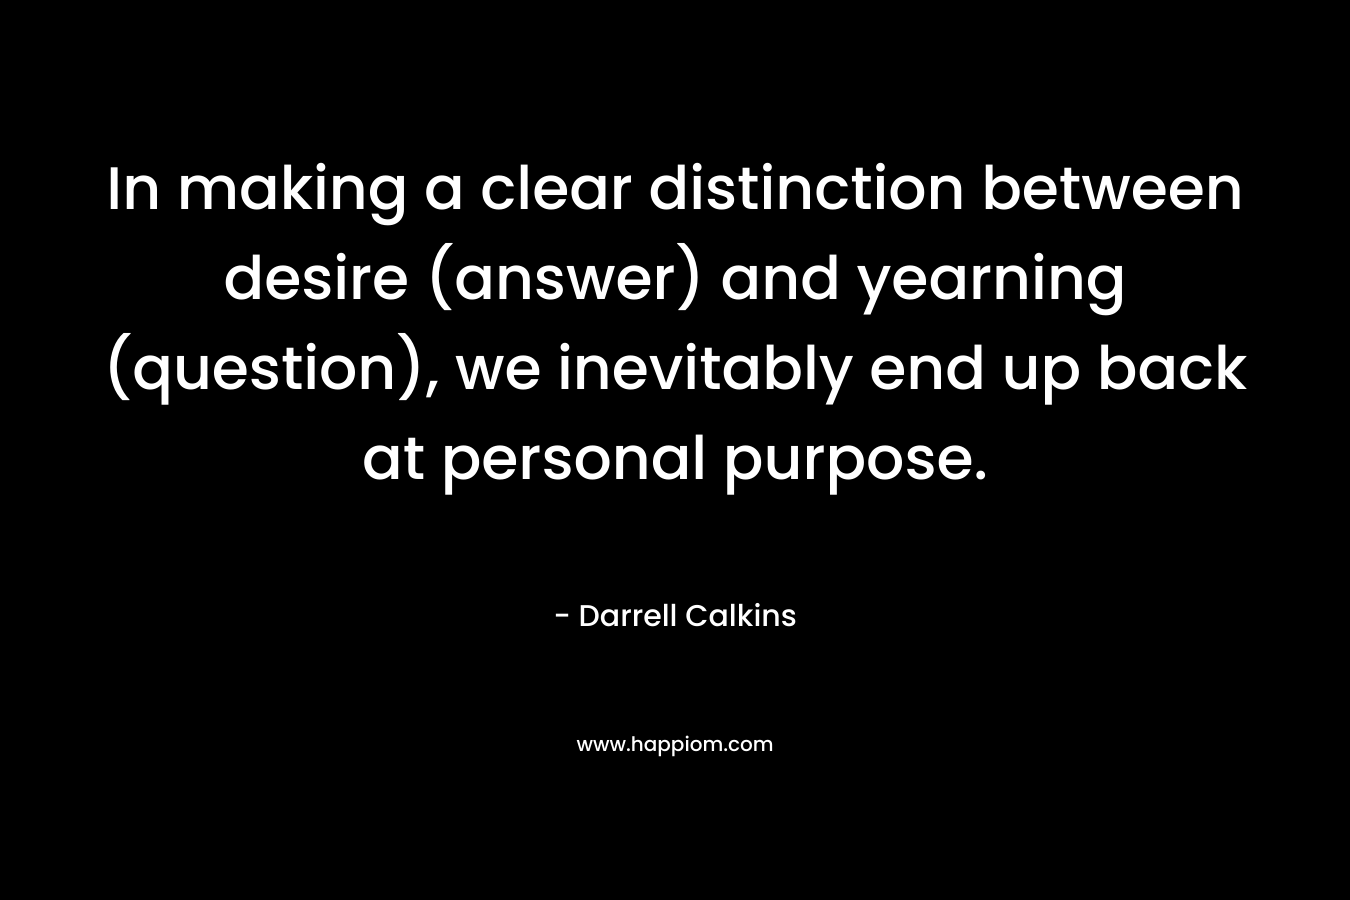 In making a clear distinction between desire (answer) and yearning (question), we inevitably end up back at personal purpose.